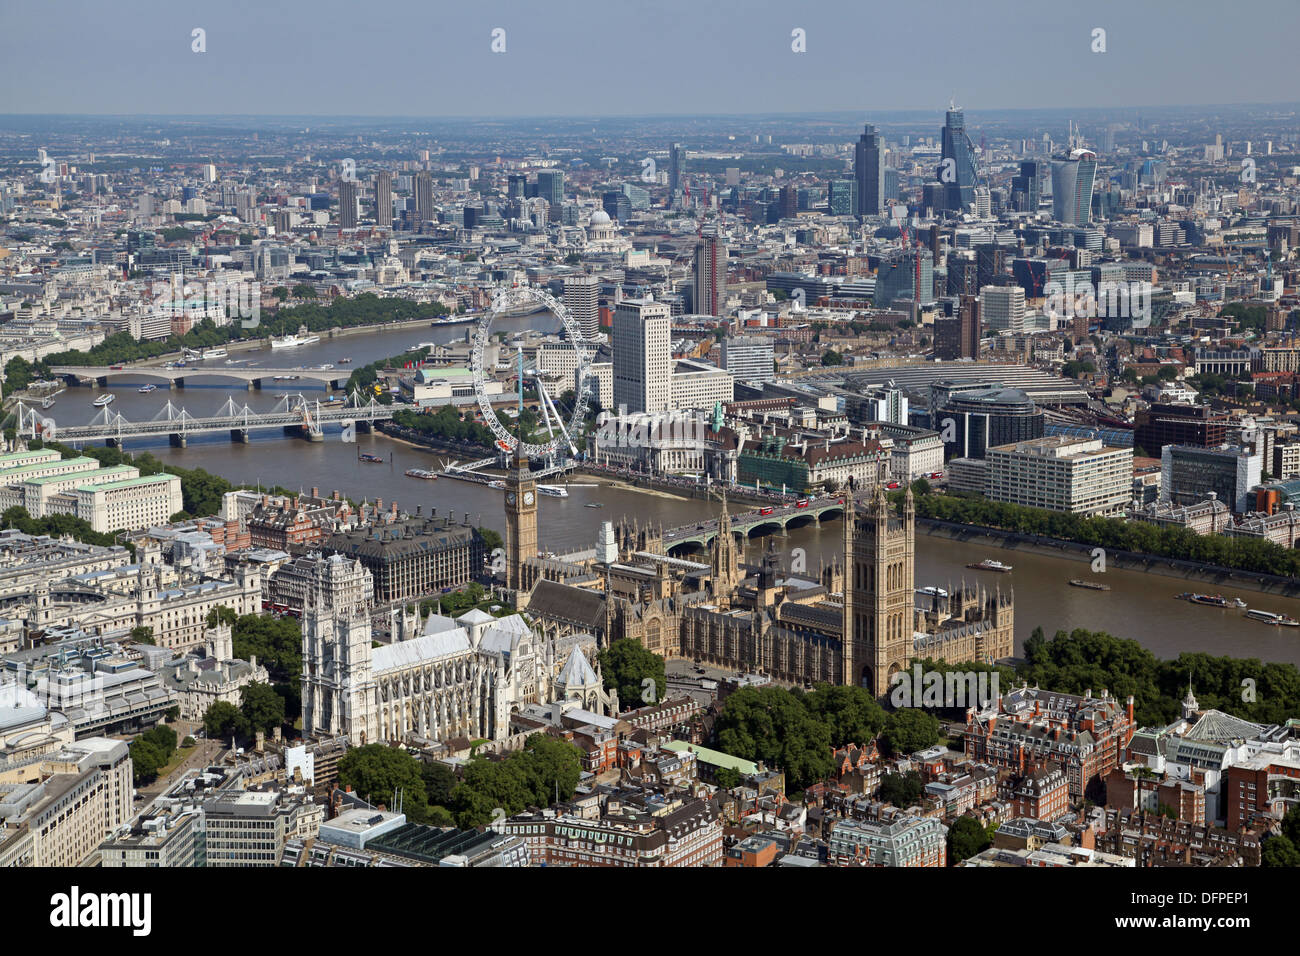 aerial view of Westminster Abbey, The Houses of Parliament, London Eye, Westminster Bridge, South Bank, Thames & City of London Stock Photo